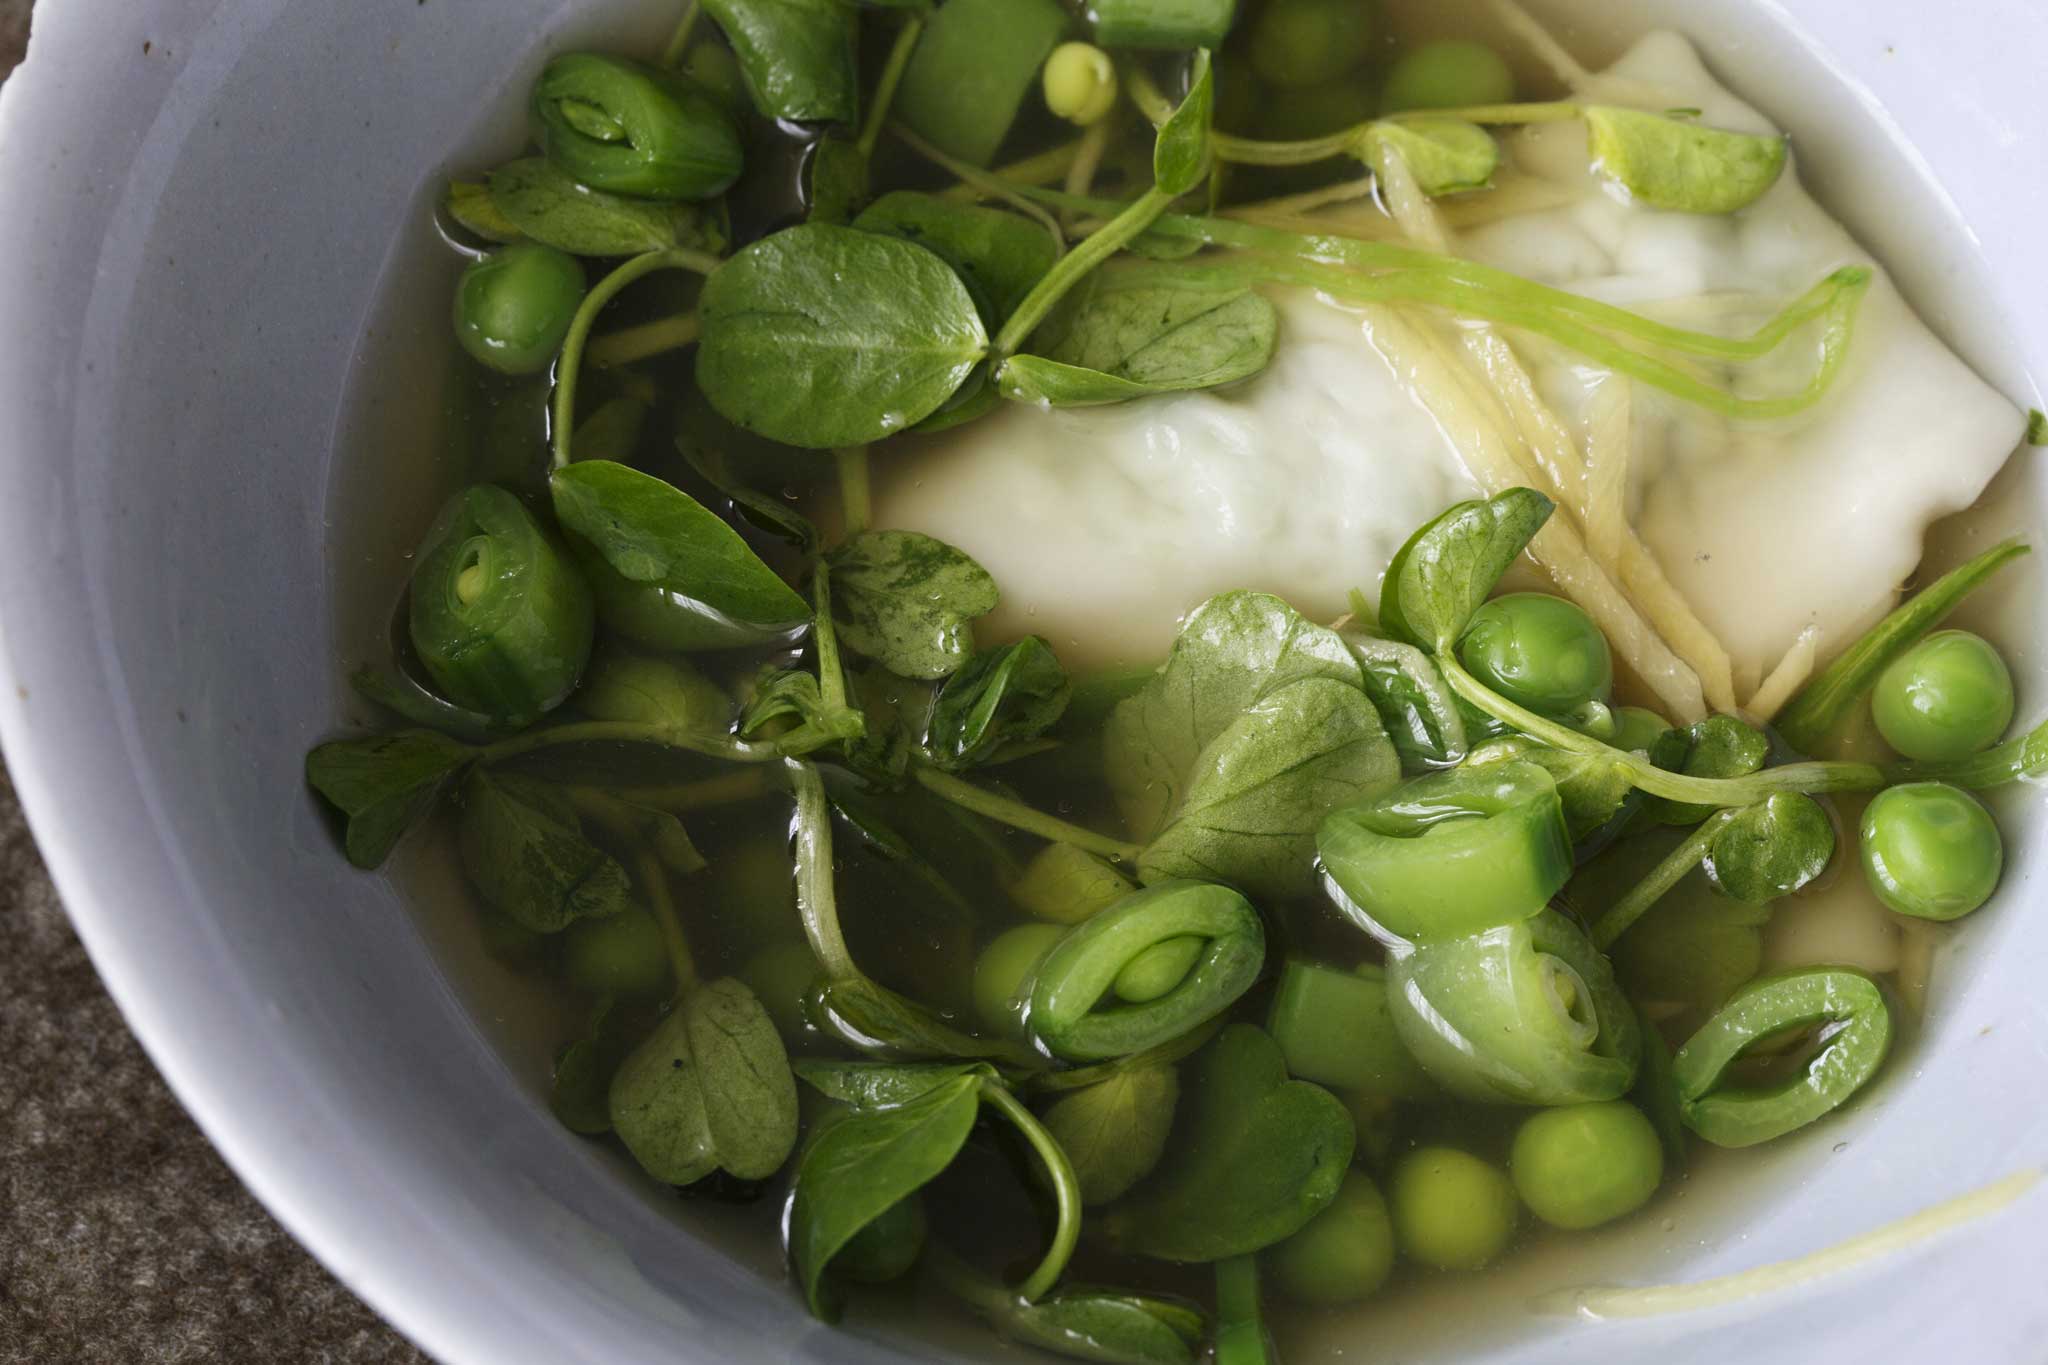 Goyza pea dumplings in broth with peas, pea shoots and sliced beans